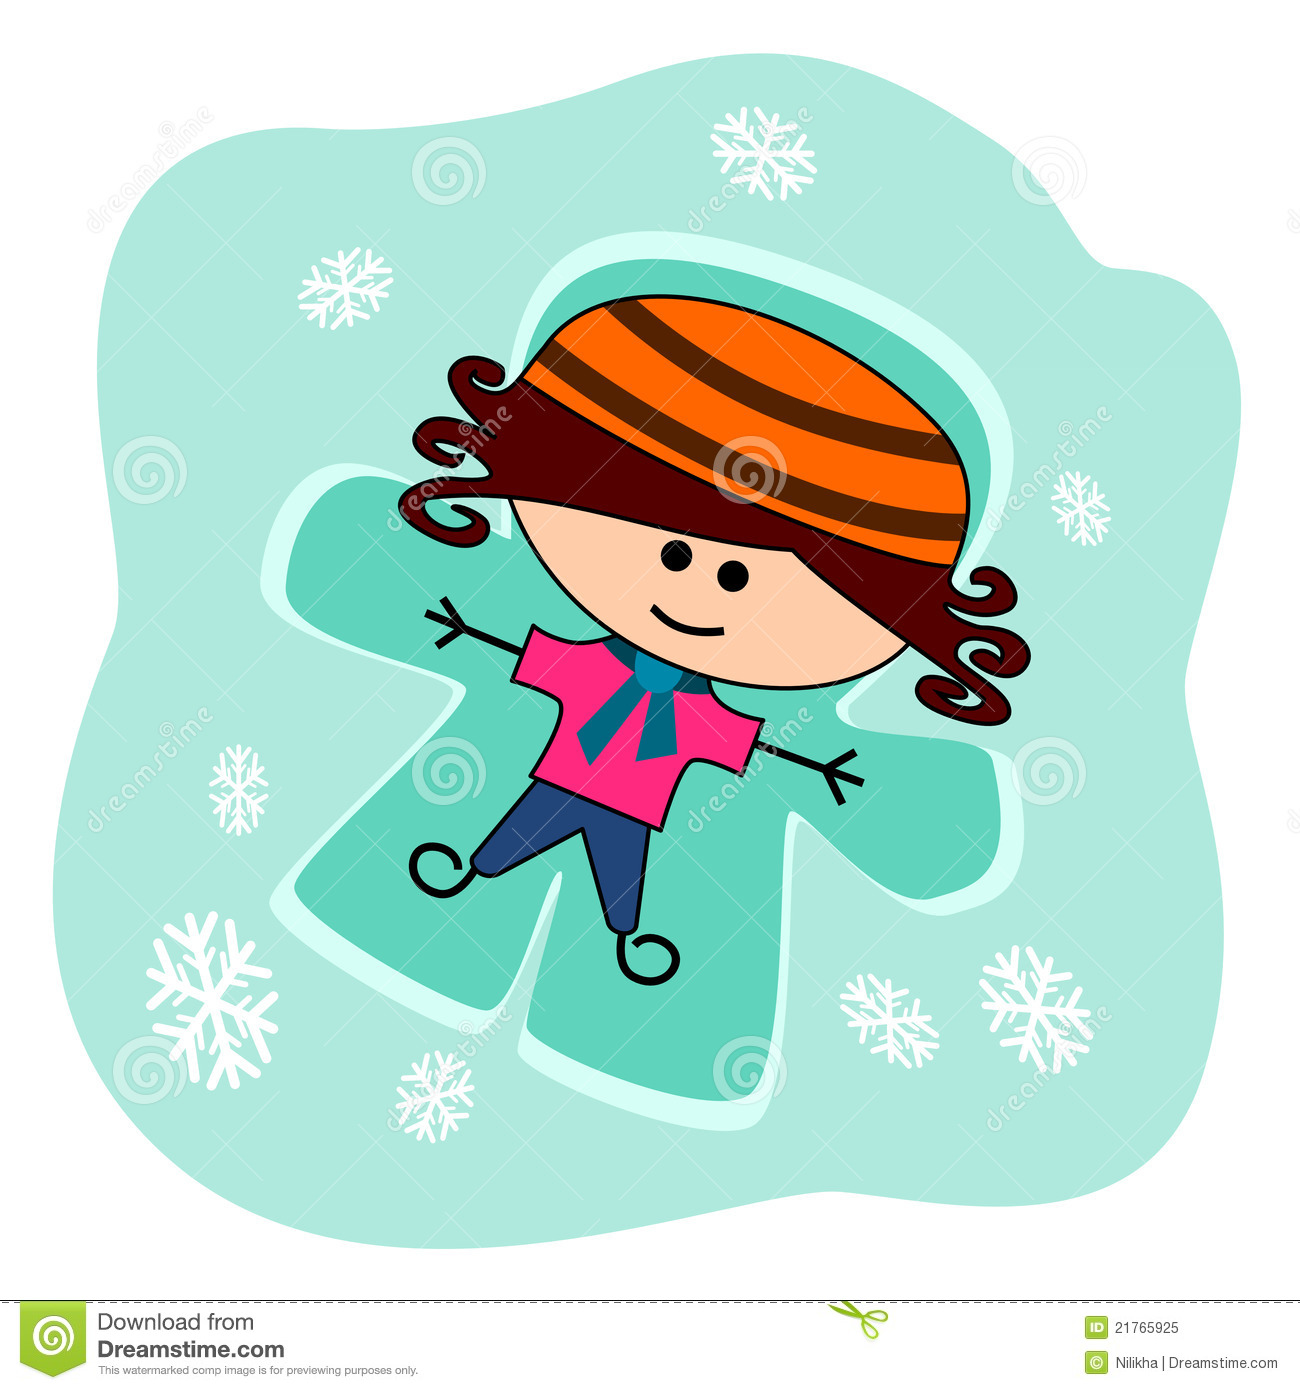 Cartoon Girl Lying On The Snow And Making A Snow Angel